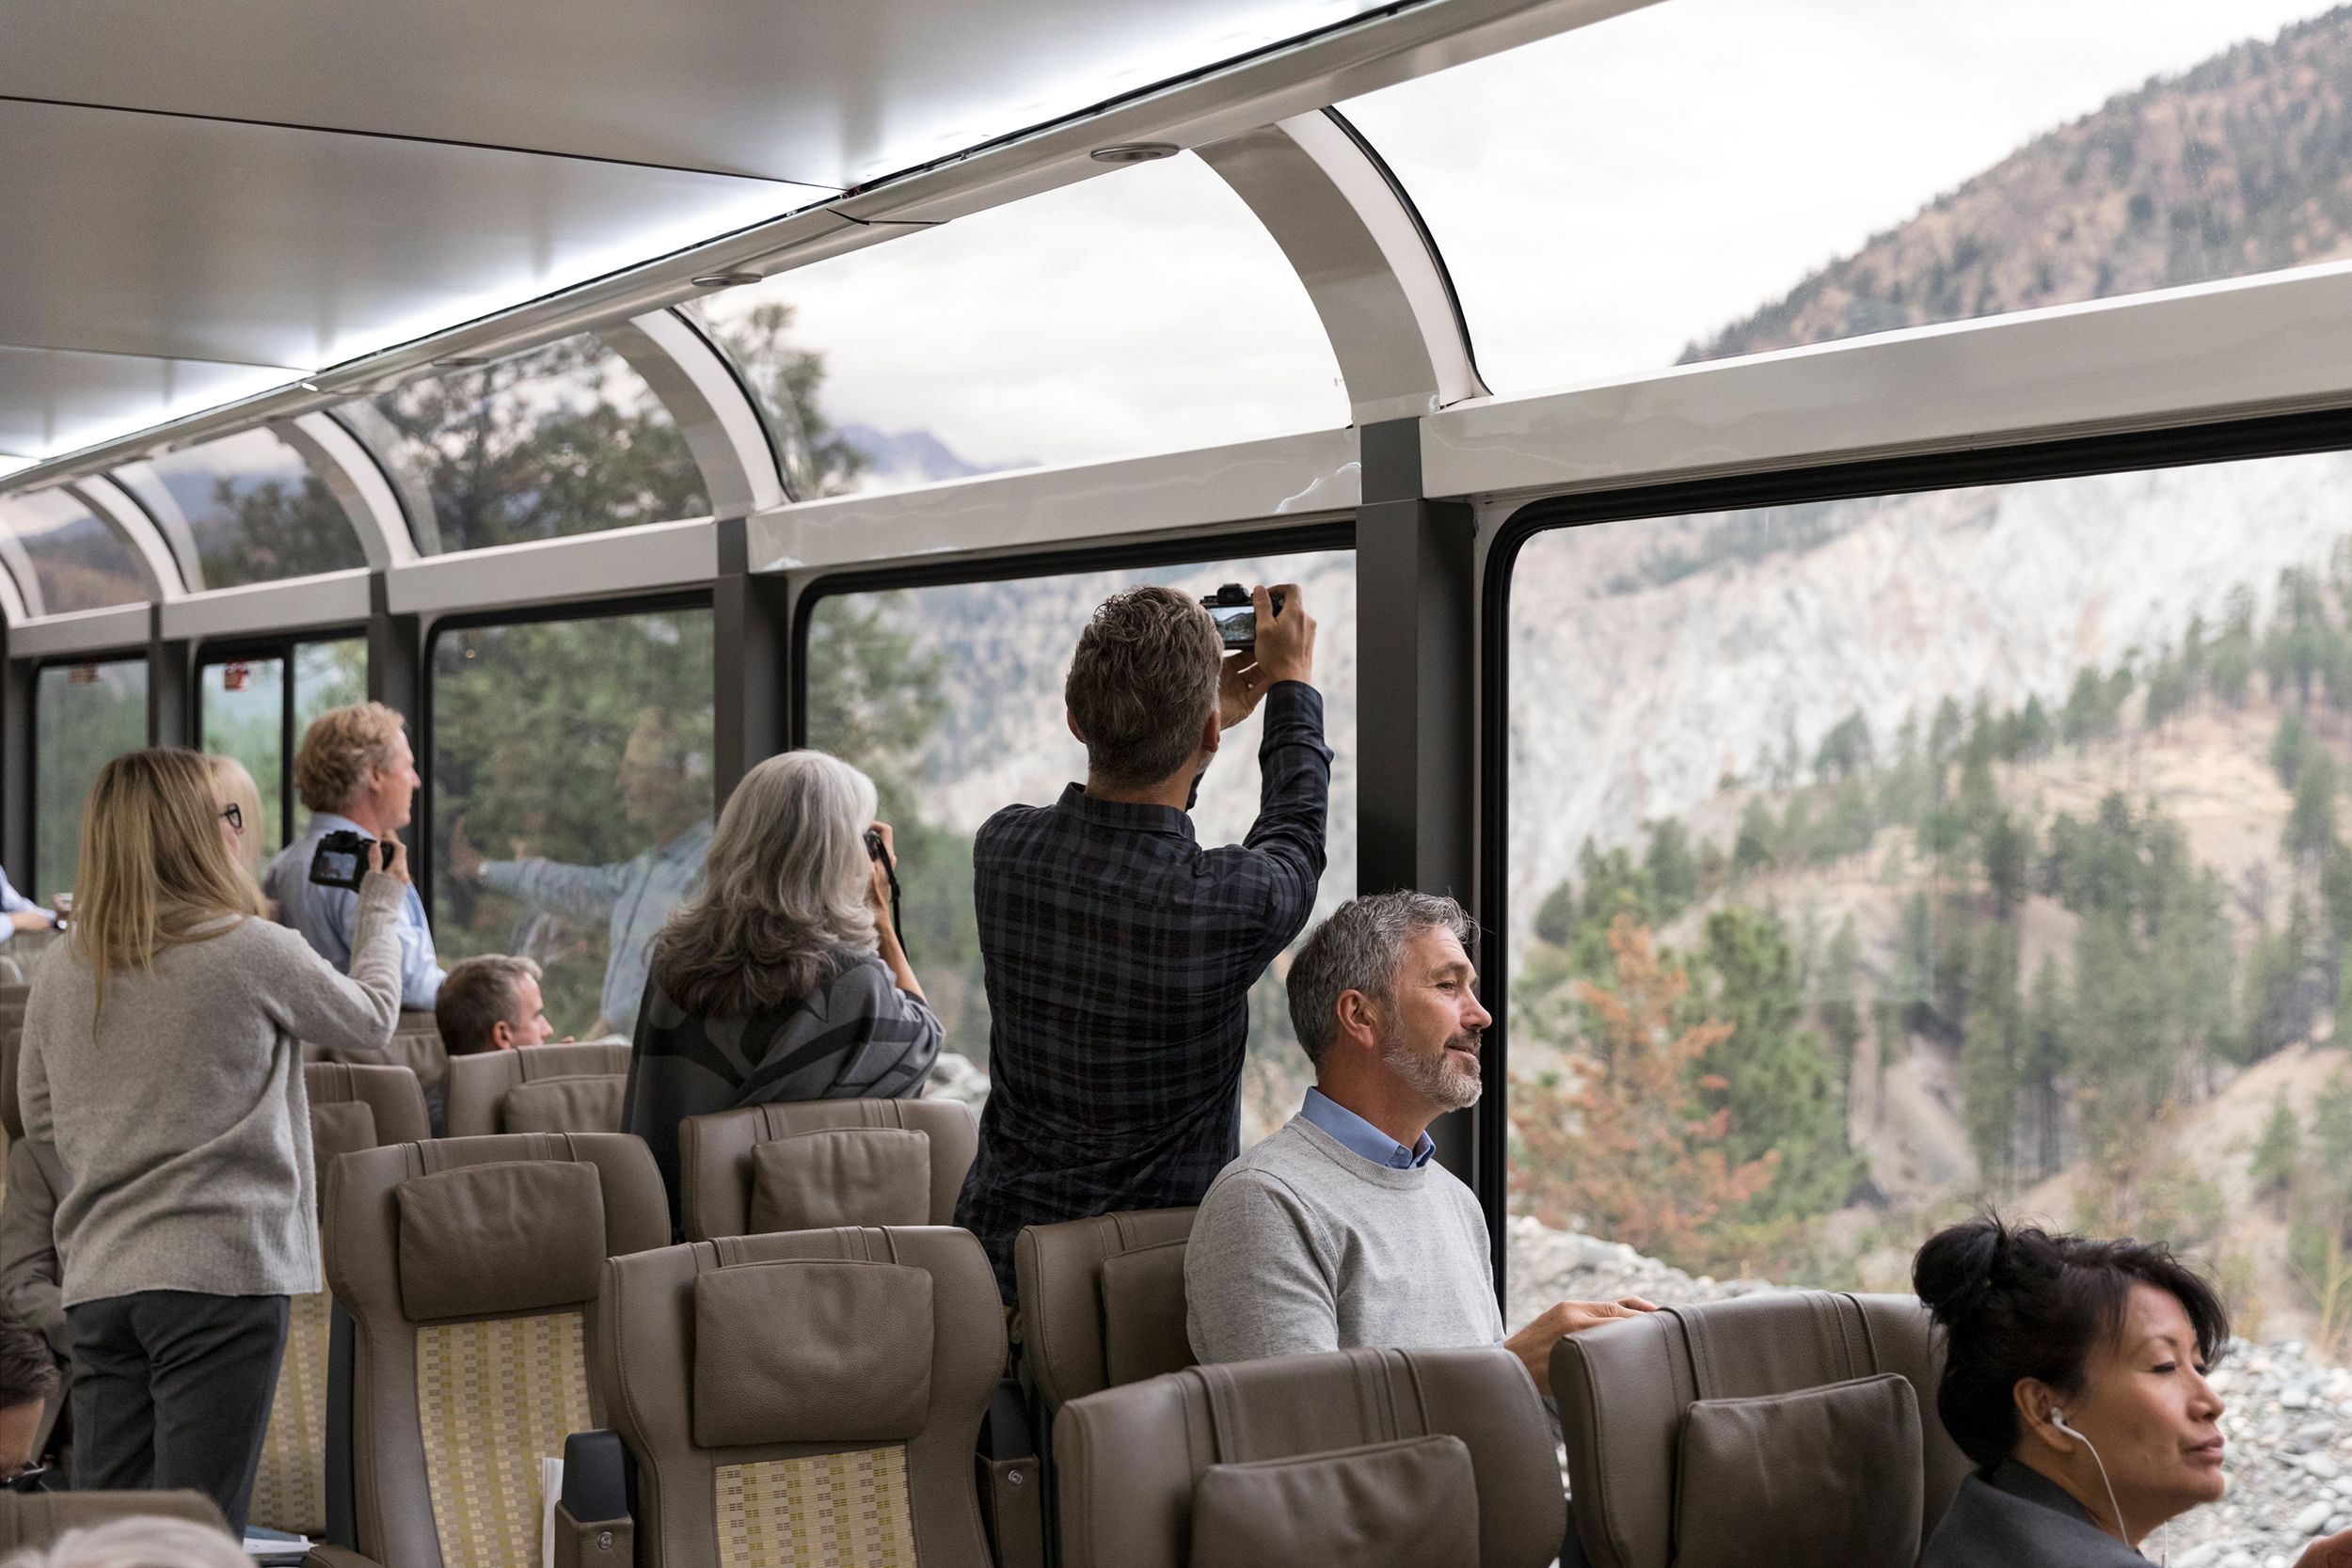 Rocky Mountaineer has glass roof for the best rail views